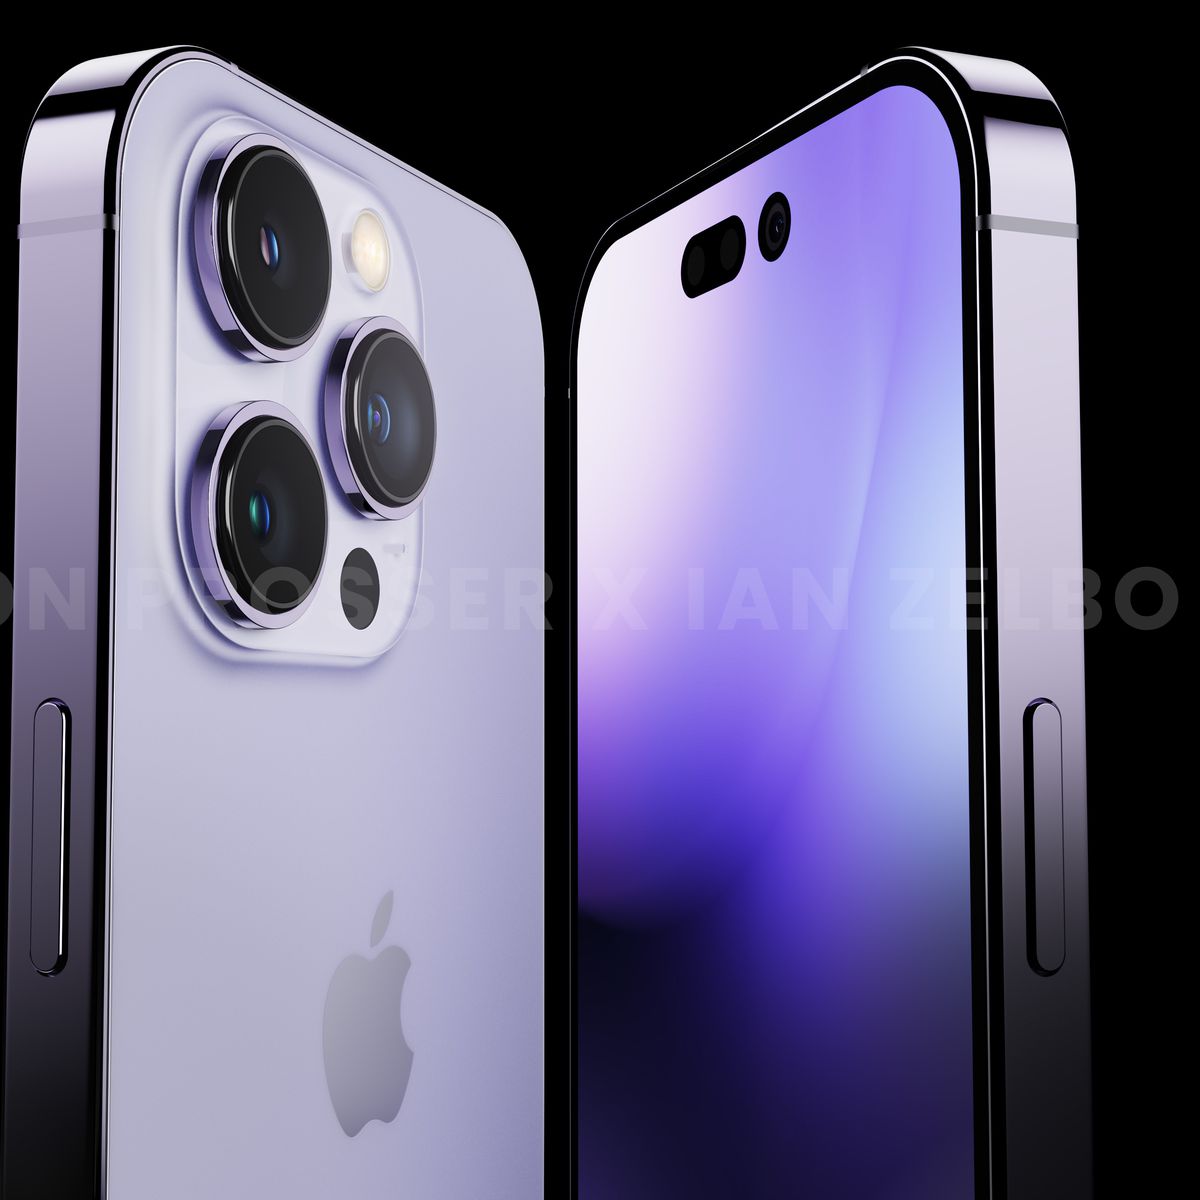 Kuo Iphone 14 Pro Models To Gain New Ultra Wide Camera With Better Low Light Sensitivity Macrumors